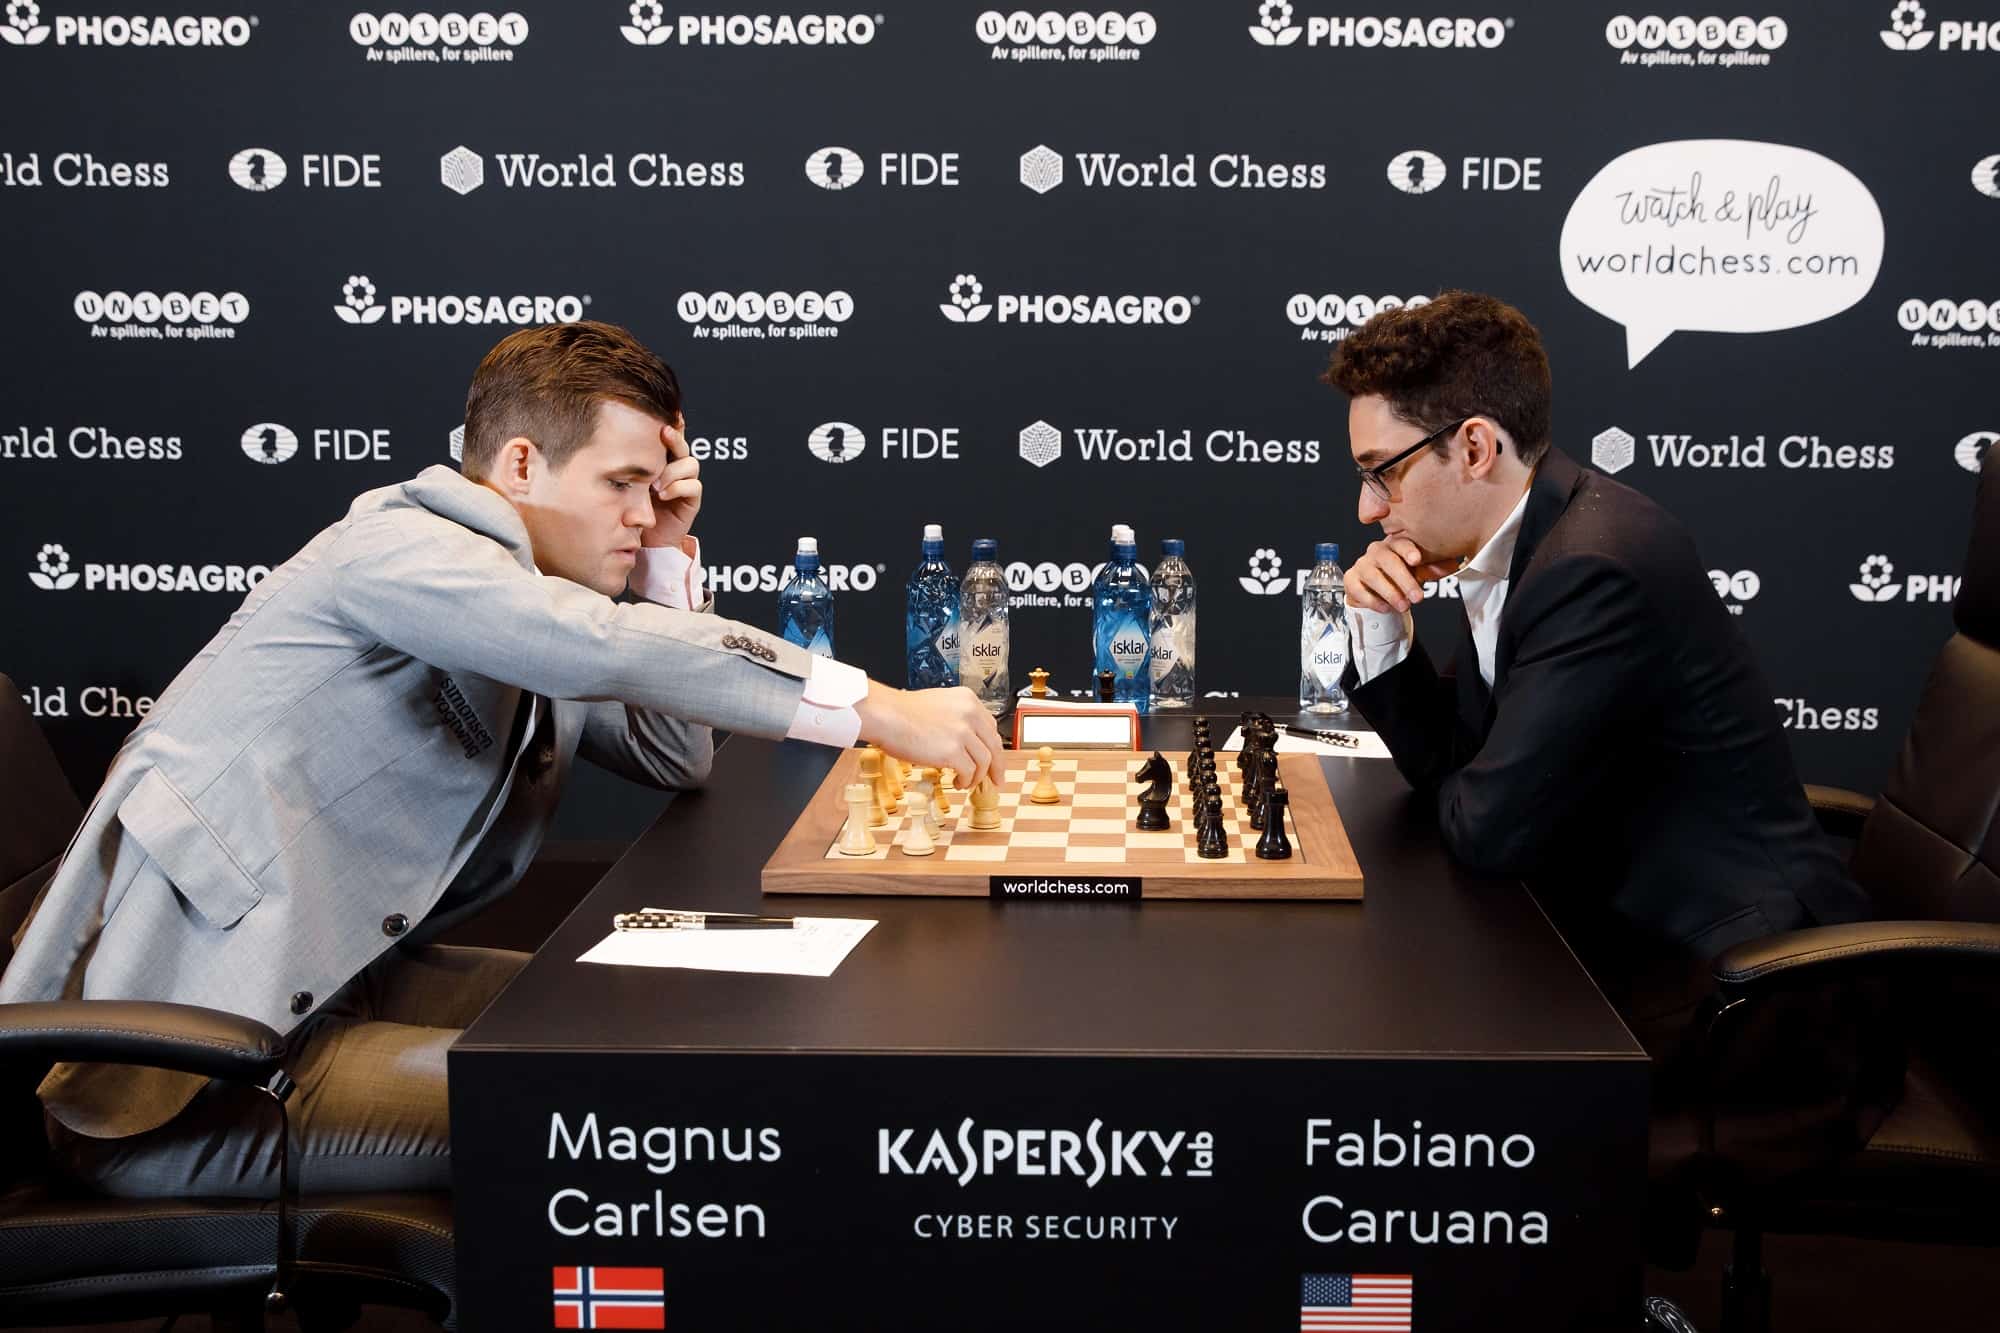 Carlsen opened with 1.d4